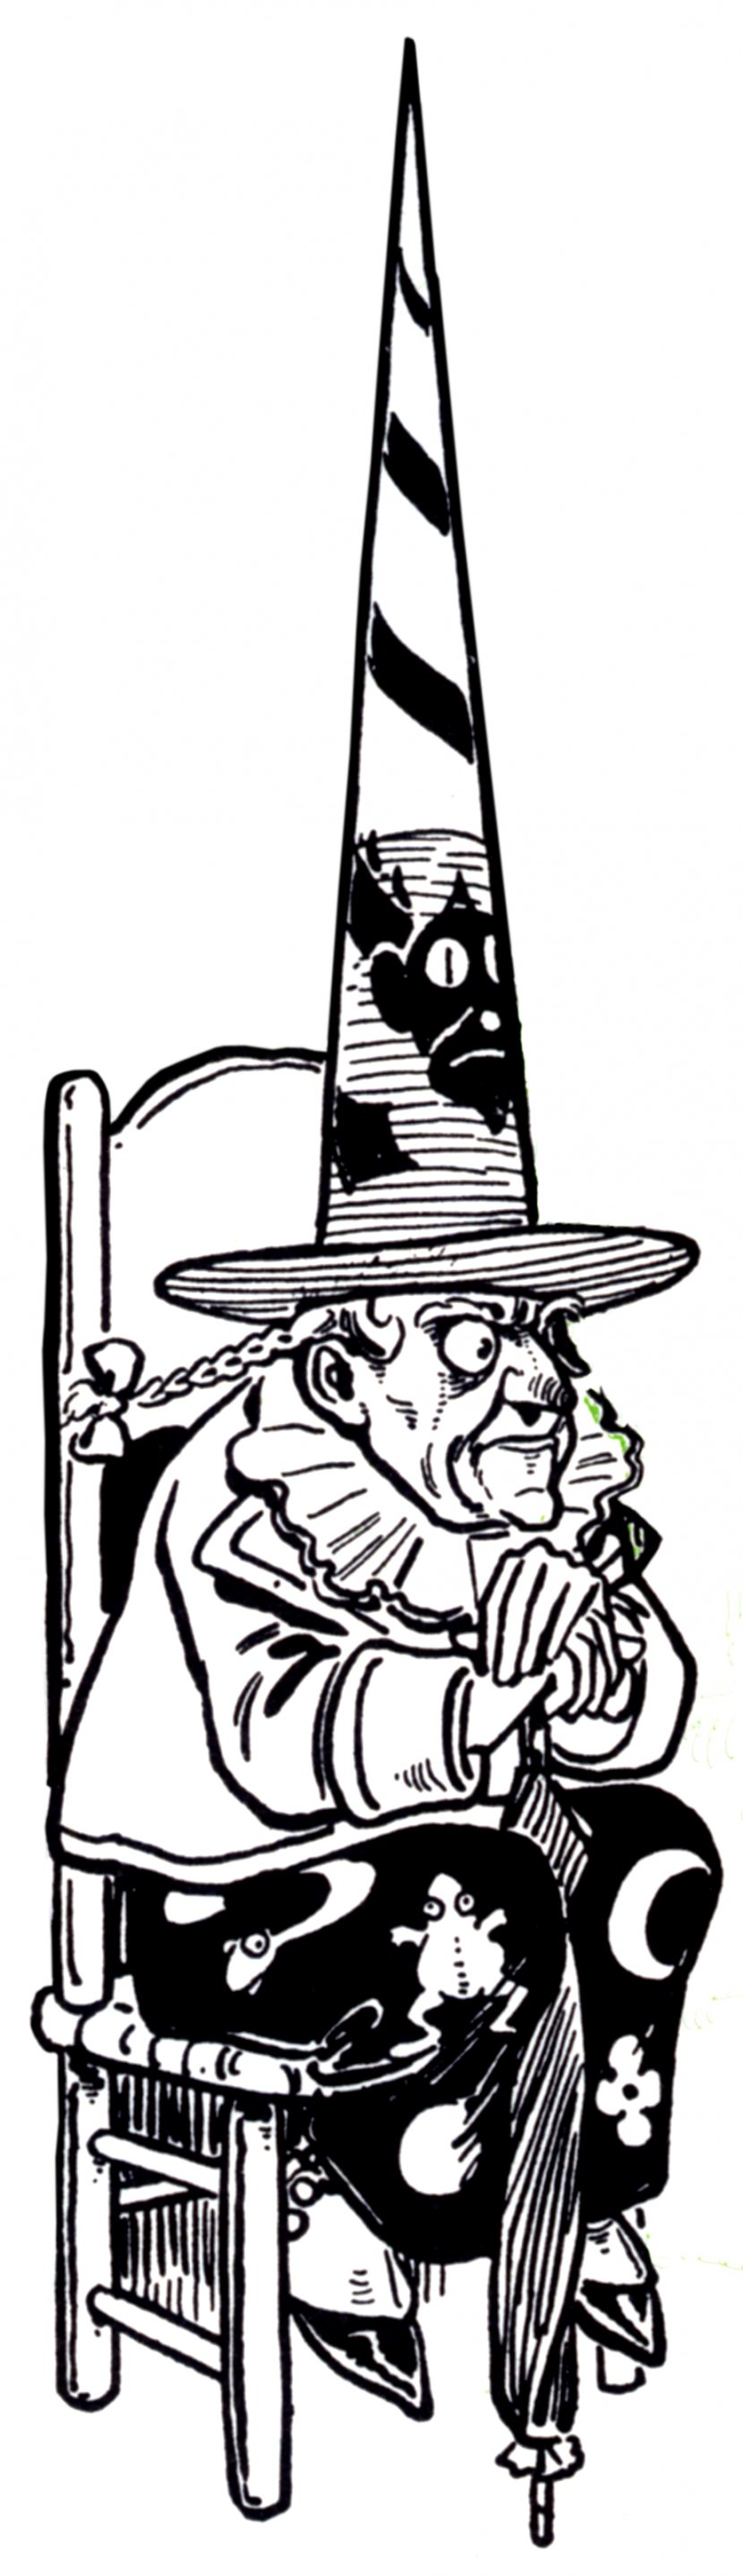 Wicked Witch Of The West East Wonderful Wizard Oz Dorothy Gale - Character - Images Transparent PNG